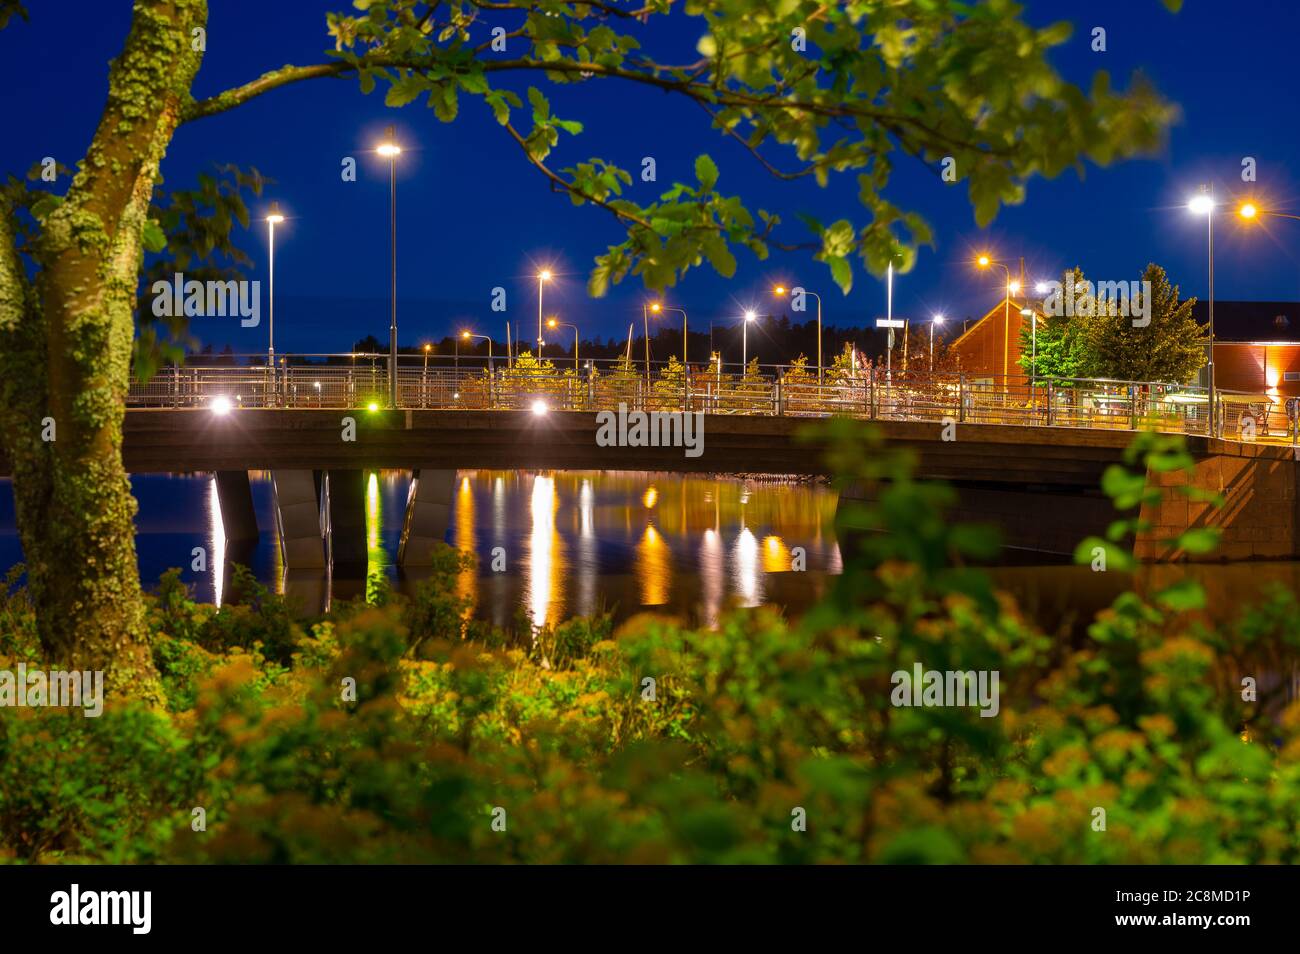 A long exposure shot of a calm bay area during night time. A bridge over a canal. Stock Photo